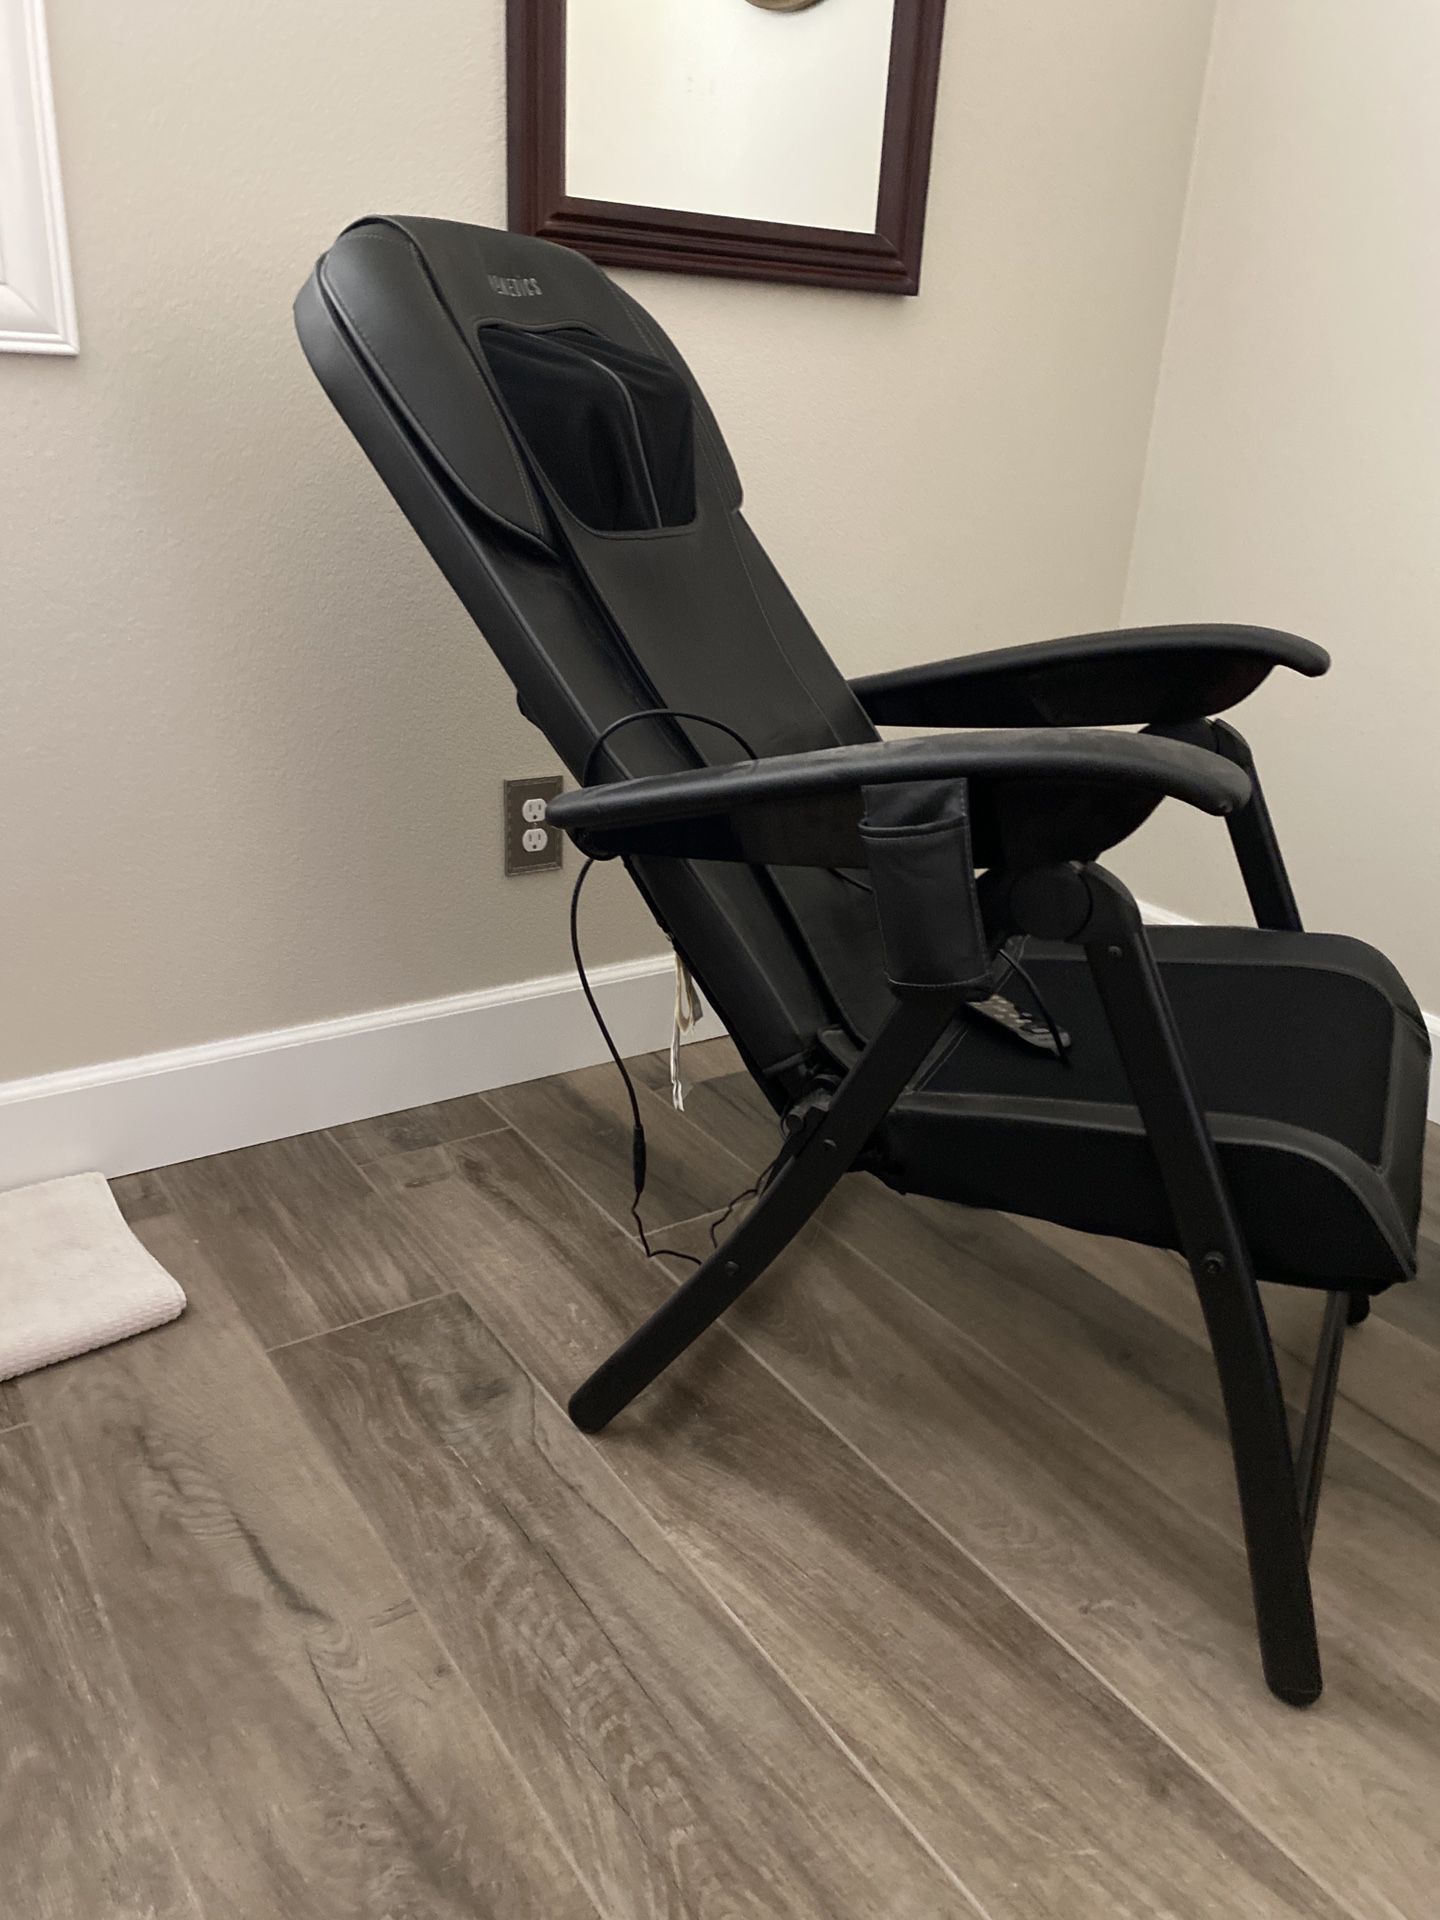 Massage Chair Homedics Mcs 1210h For Sale In Menifee Ca Offerup